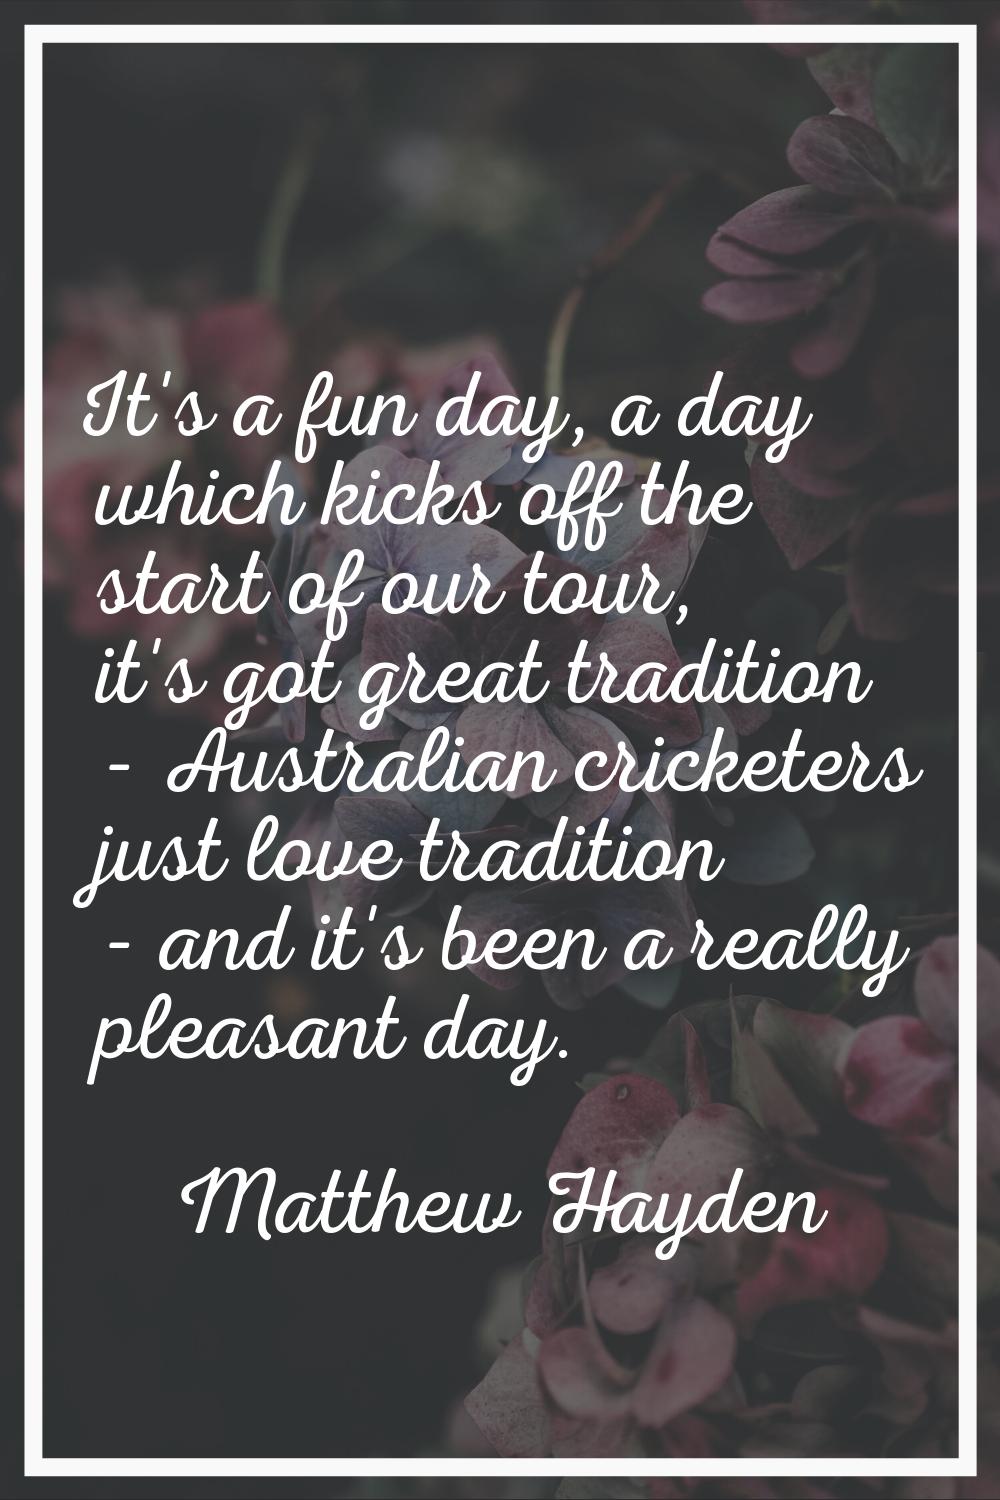 It's a fun day, a day which kicks off the start of our tour, it's got great tradition - Australian 